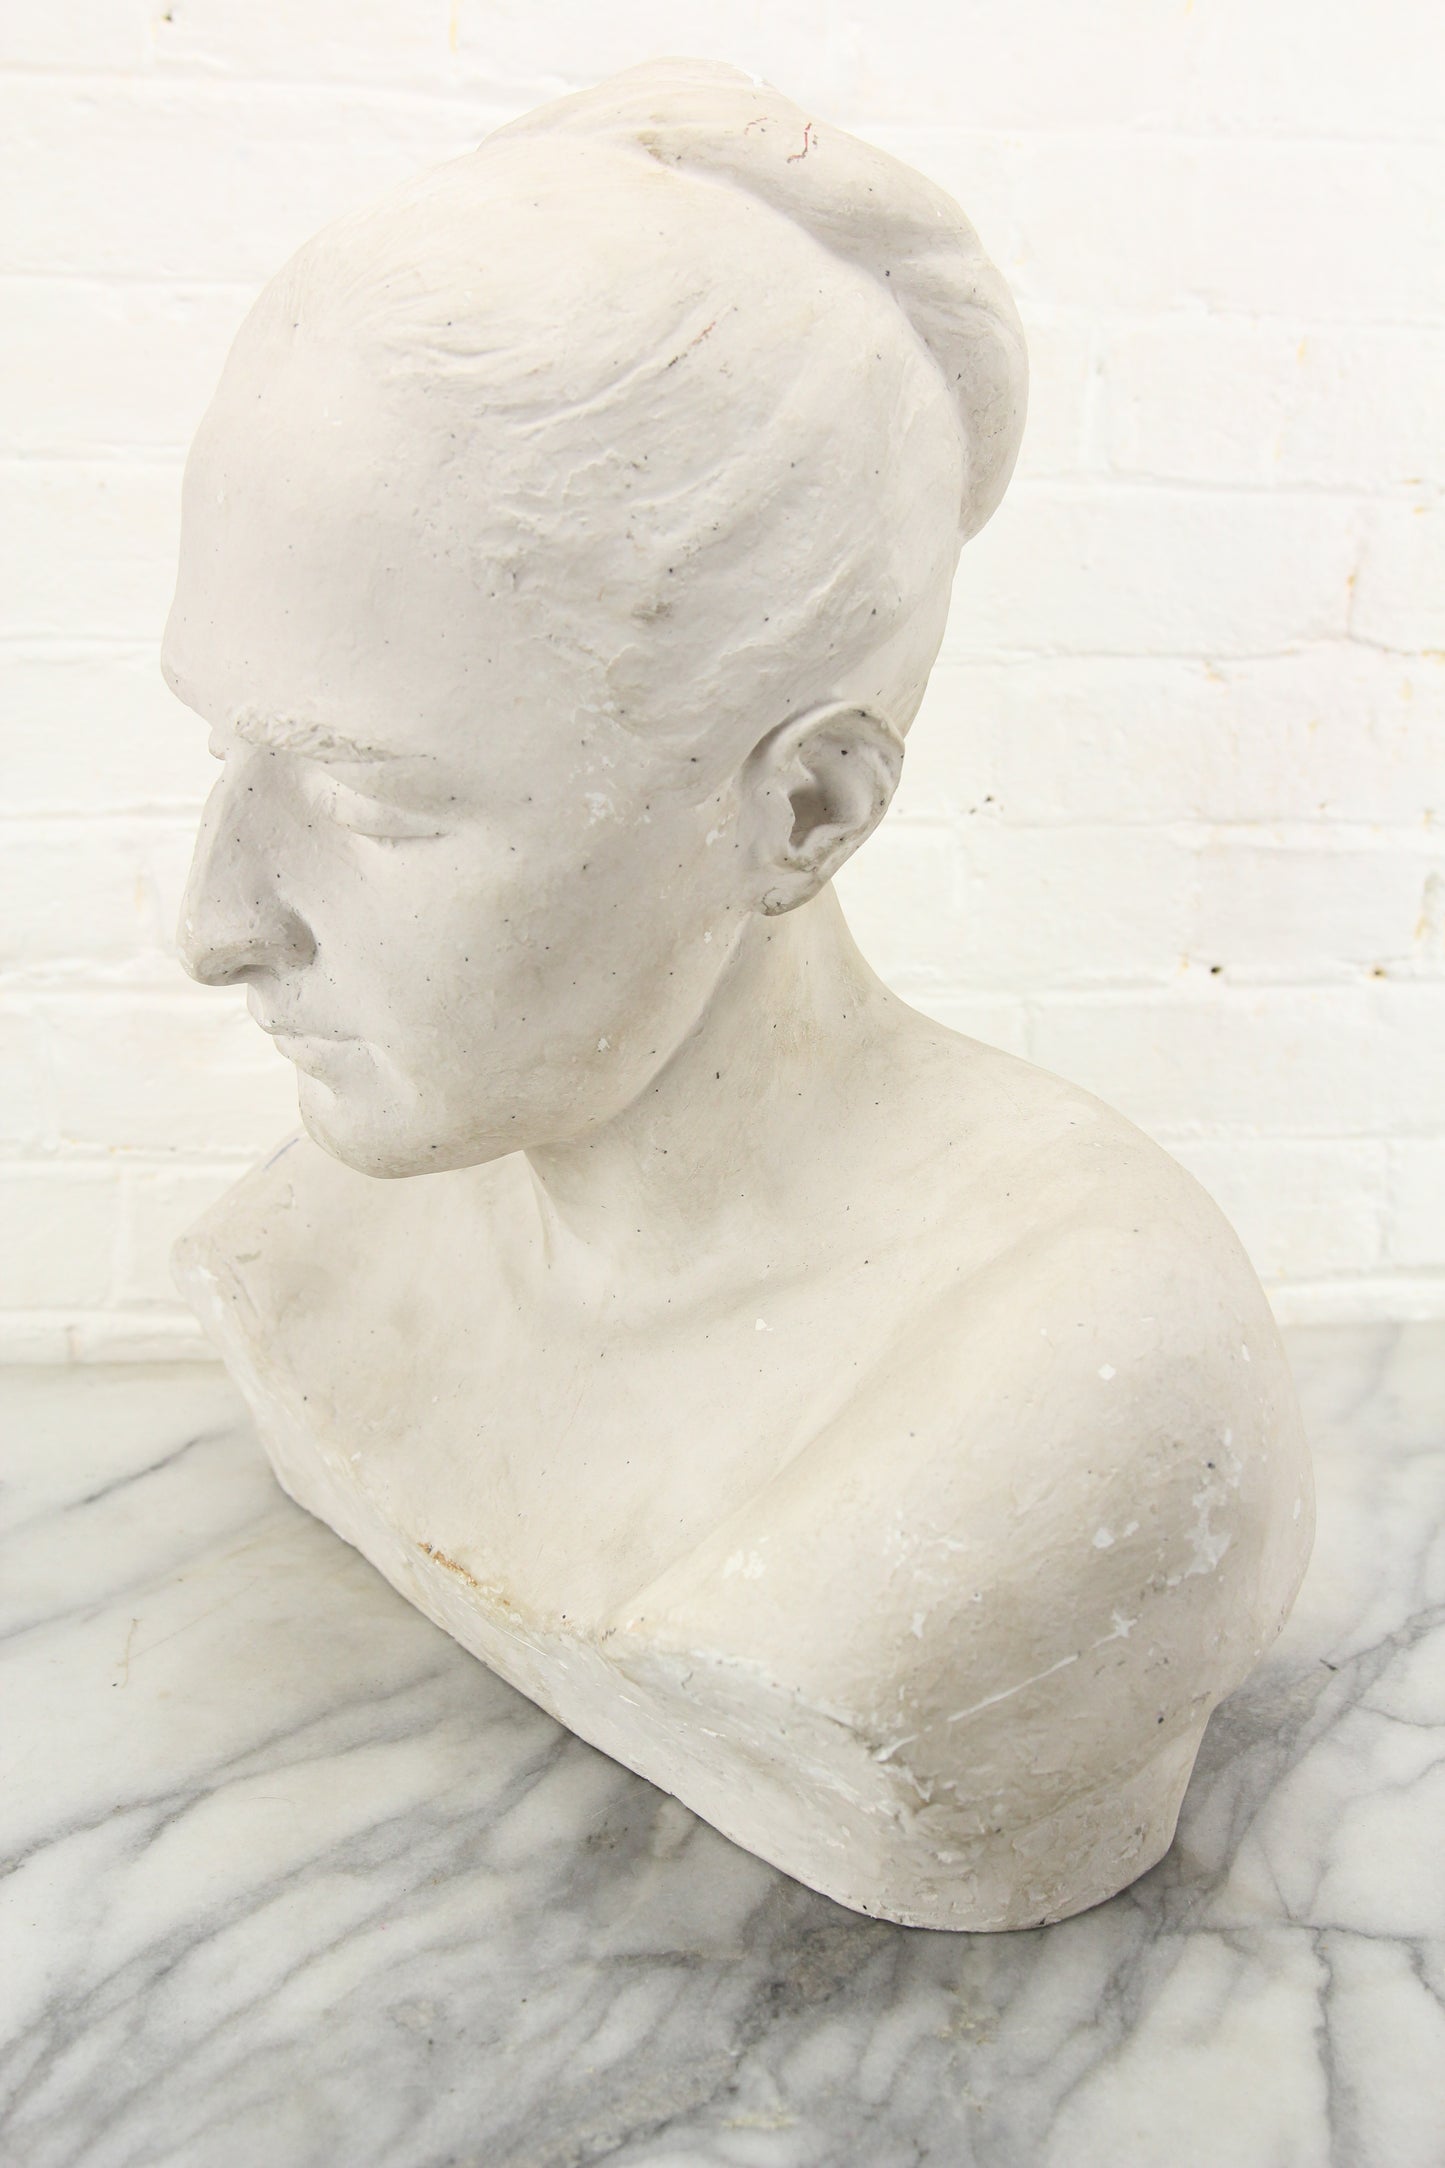 Large Plaster Bust Sculpture of A Pensive Looking Woman